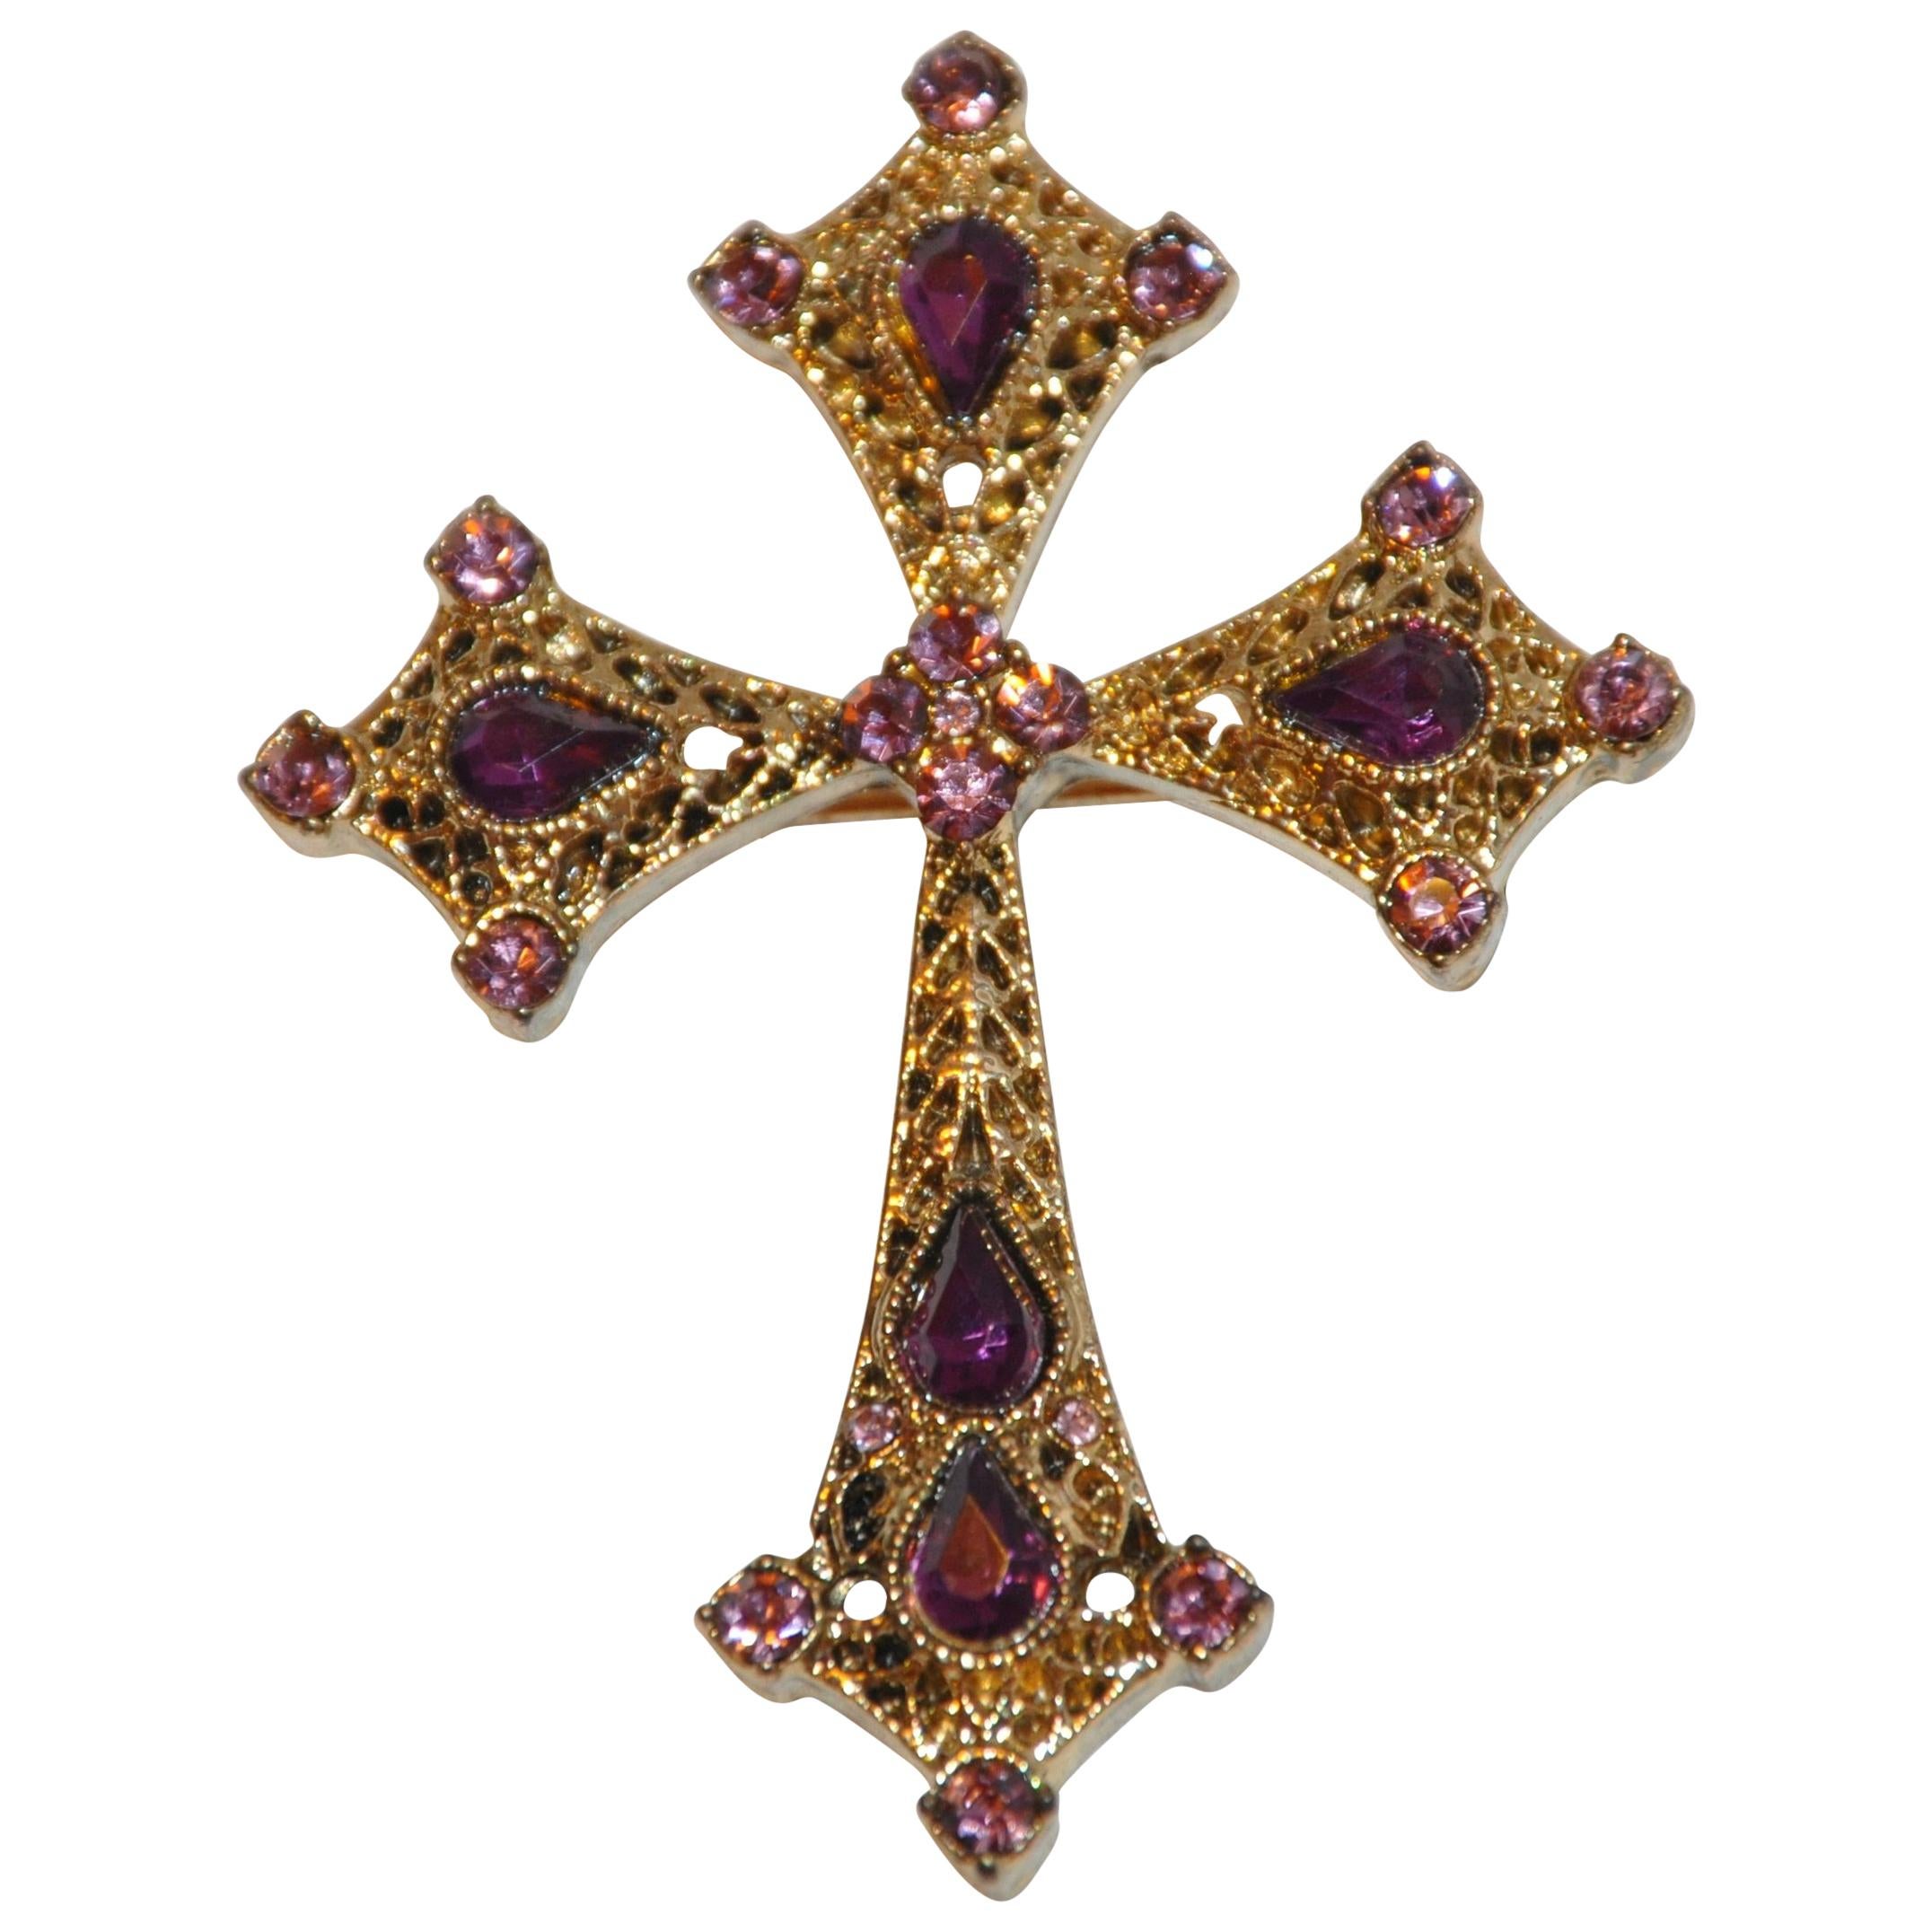 Gilded Gold Vermeil Hardware Filigree "Cross" Brooch Accented with Violet Stones For Sale